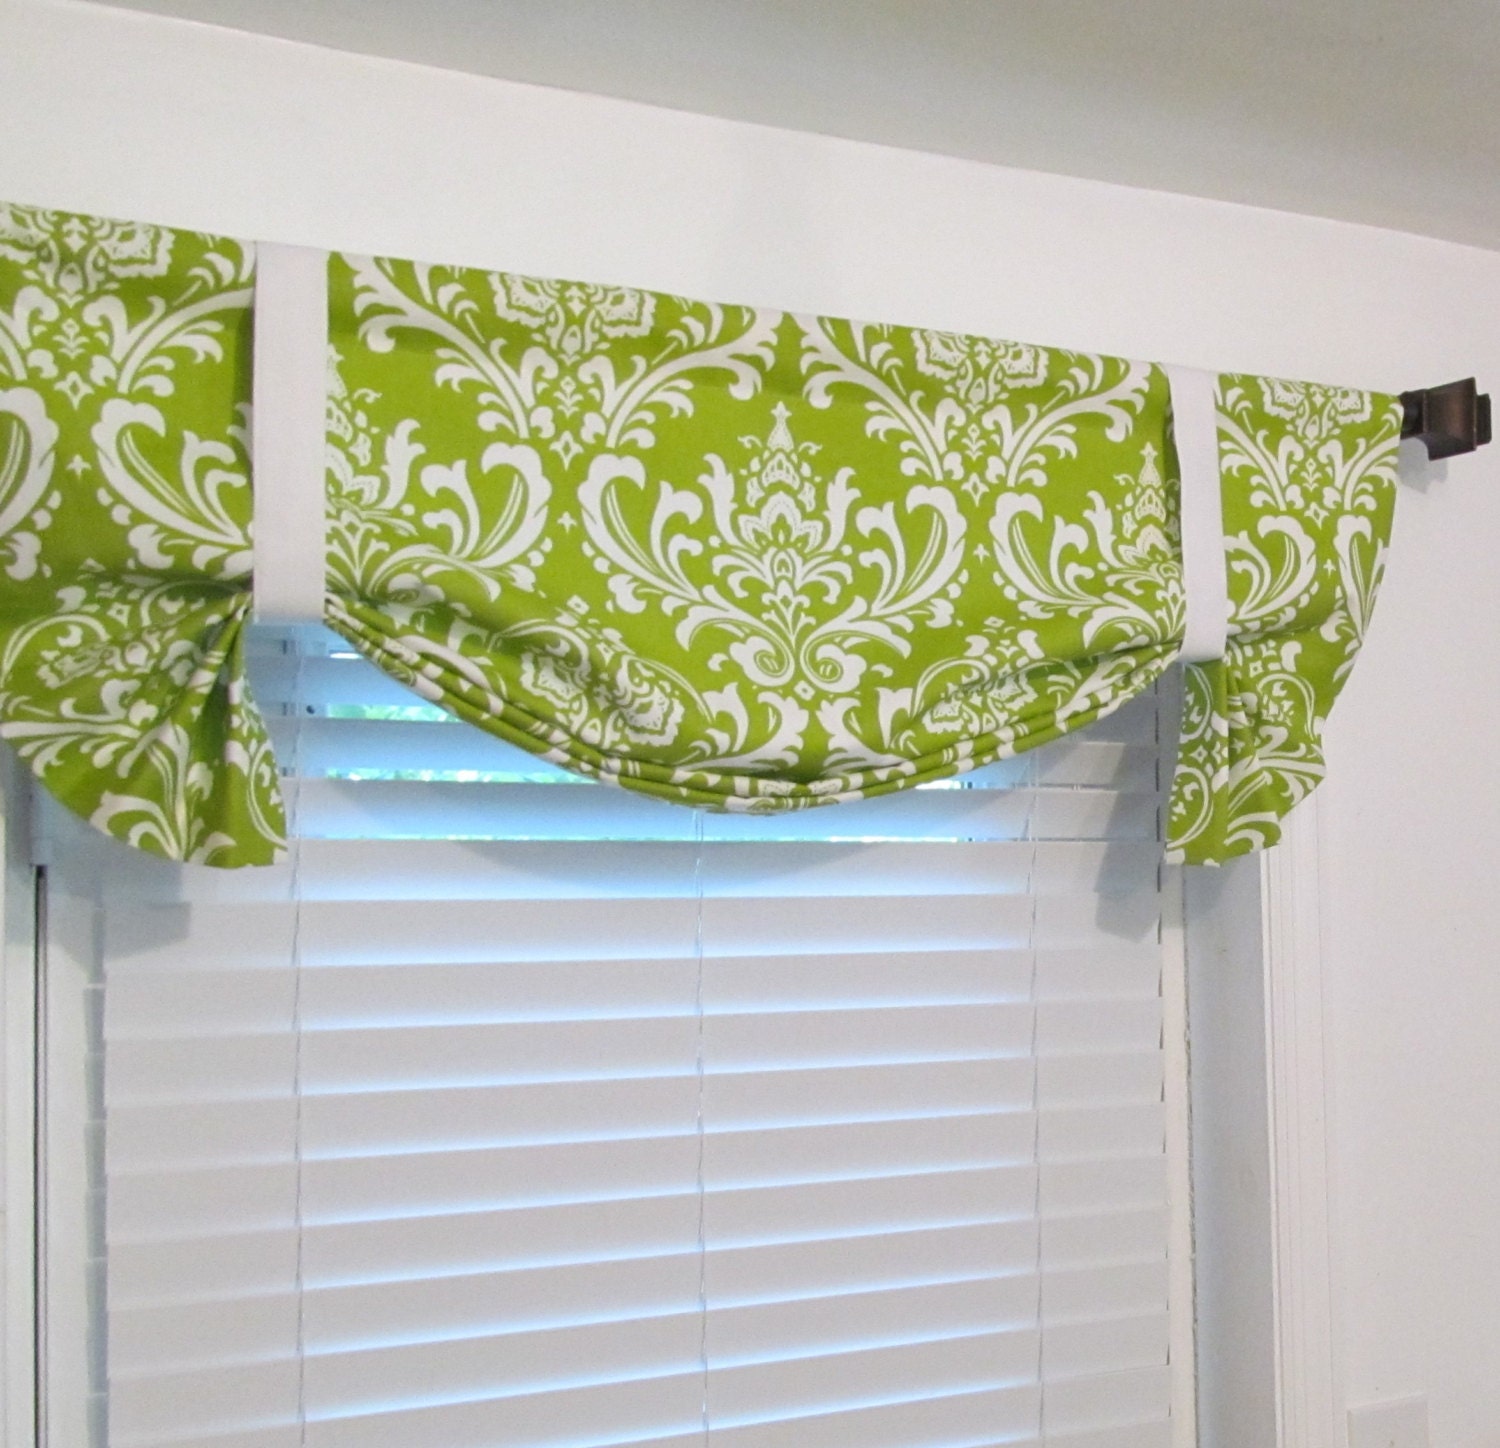 Chartreuse White Damask Tie Up Curtain VALANCE by supplierofdreams